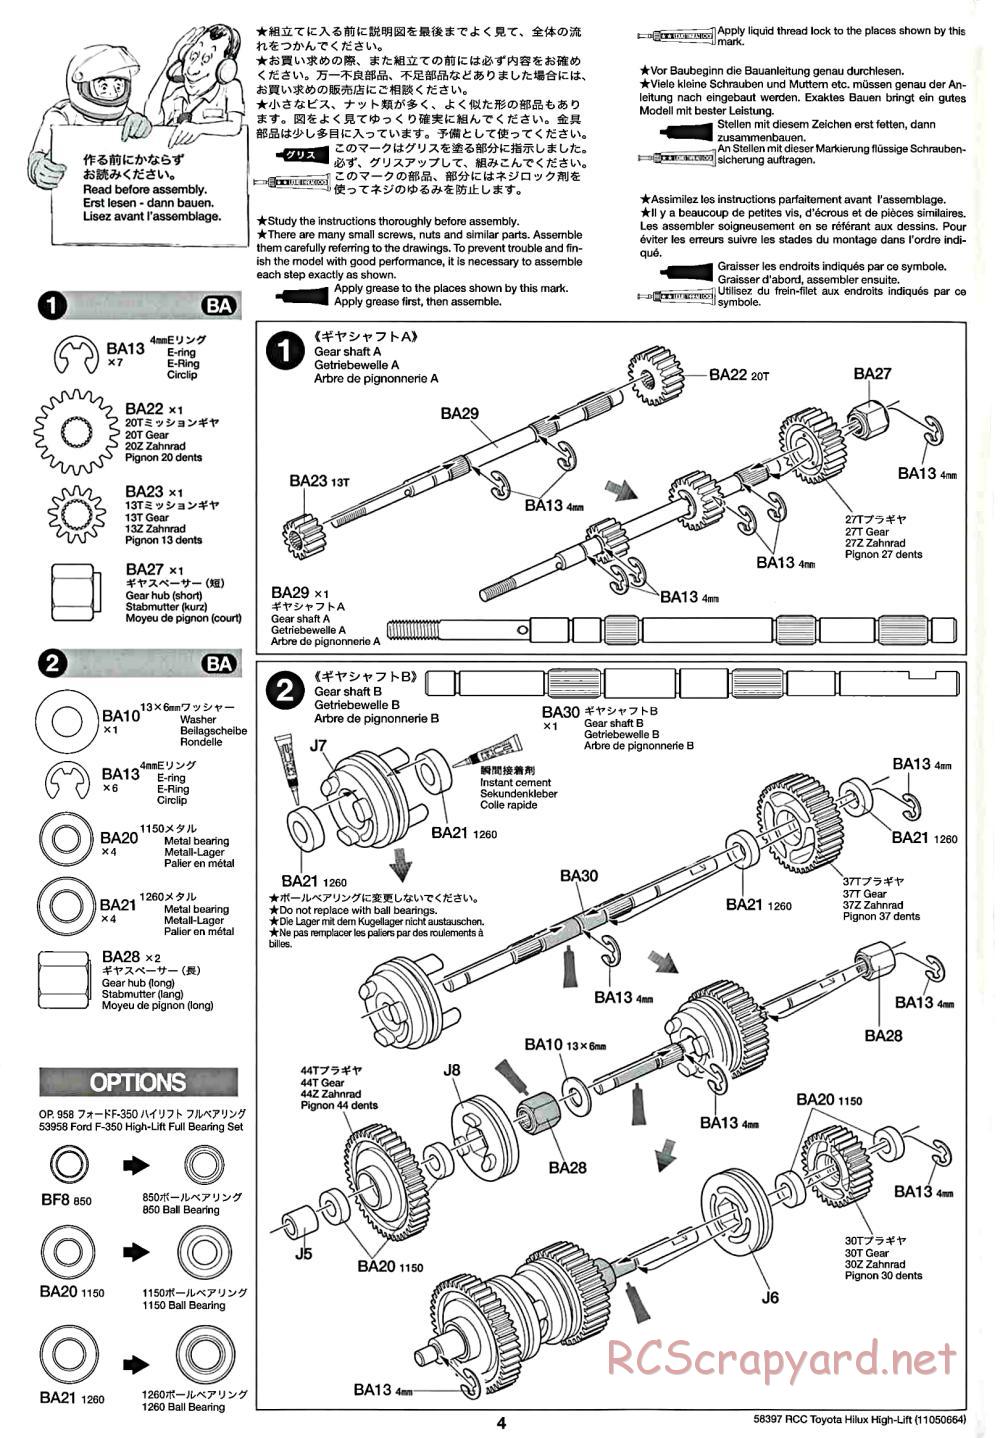 Tamiya - Toyota Hilux High-Lift Chassis - Manual - Page 4